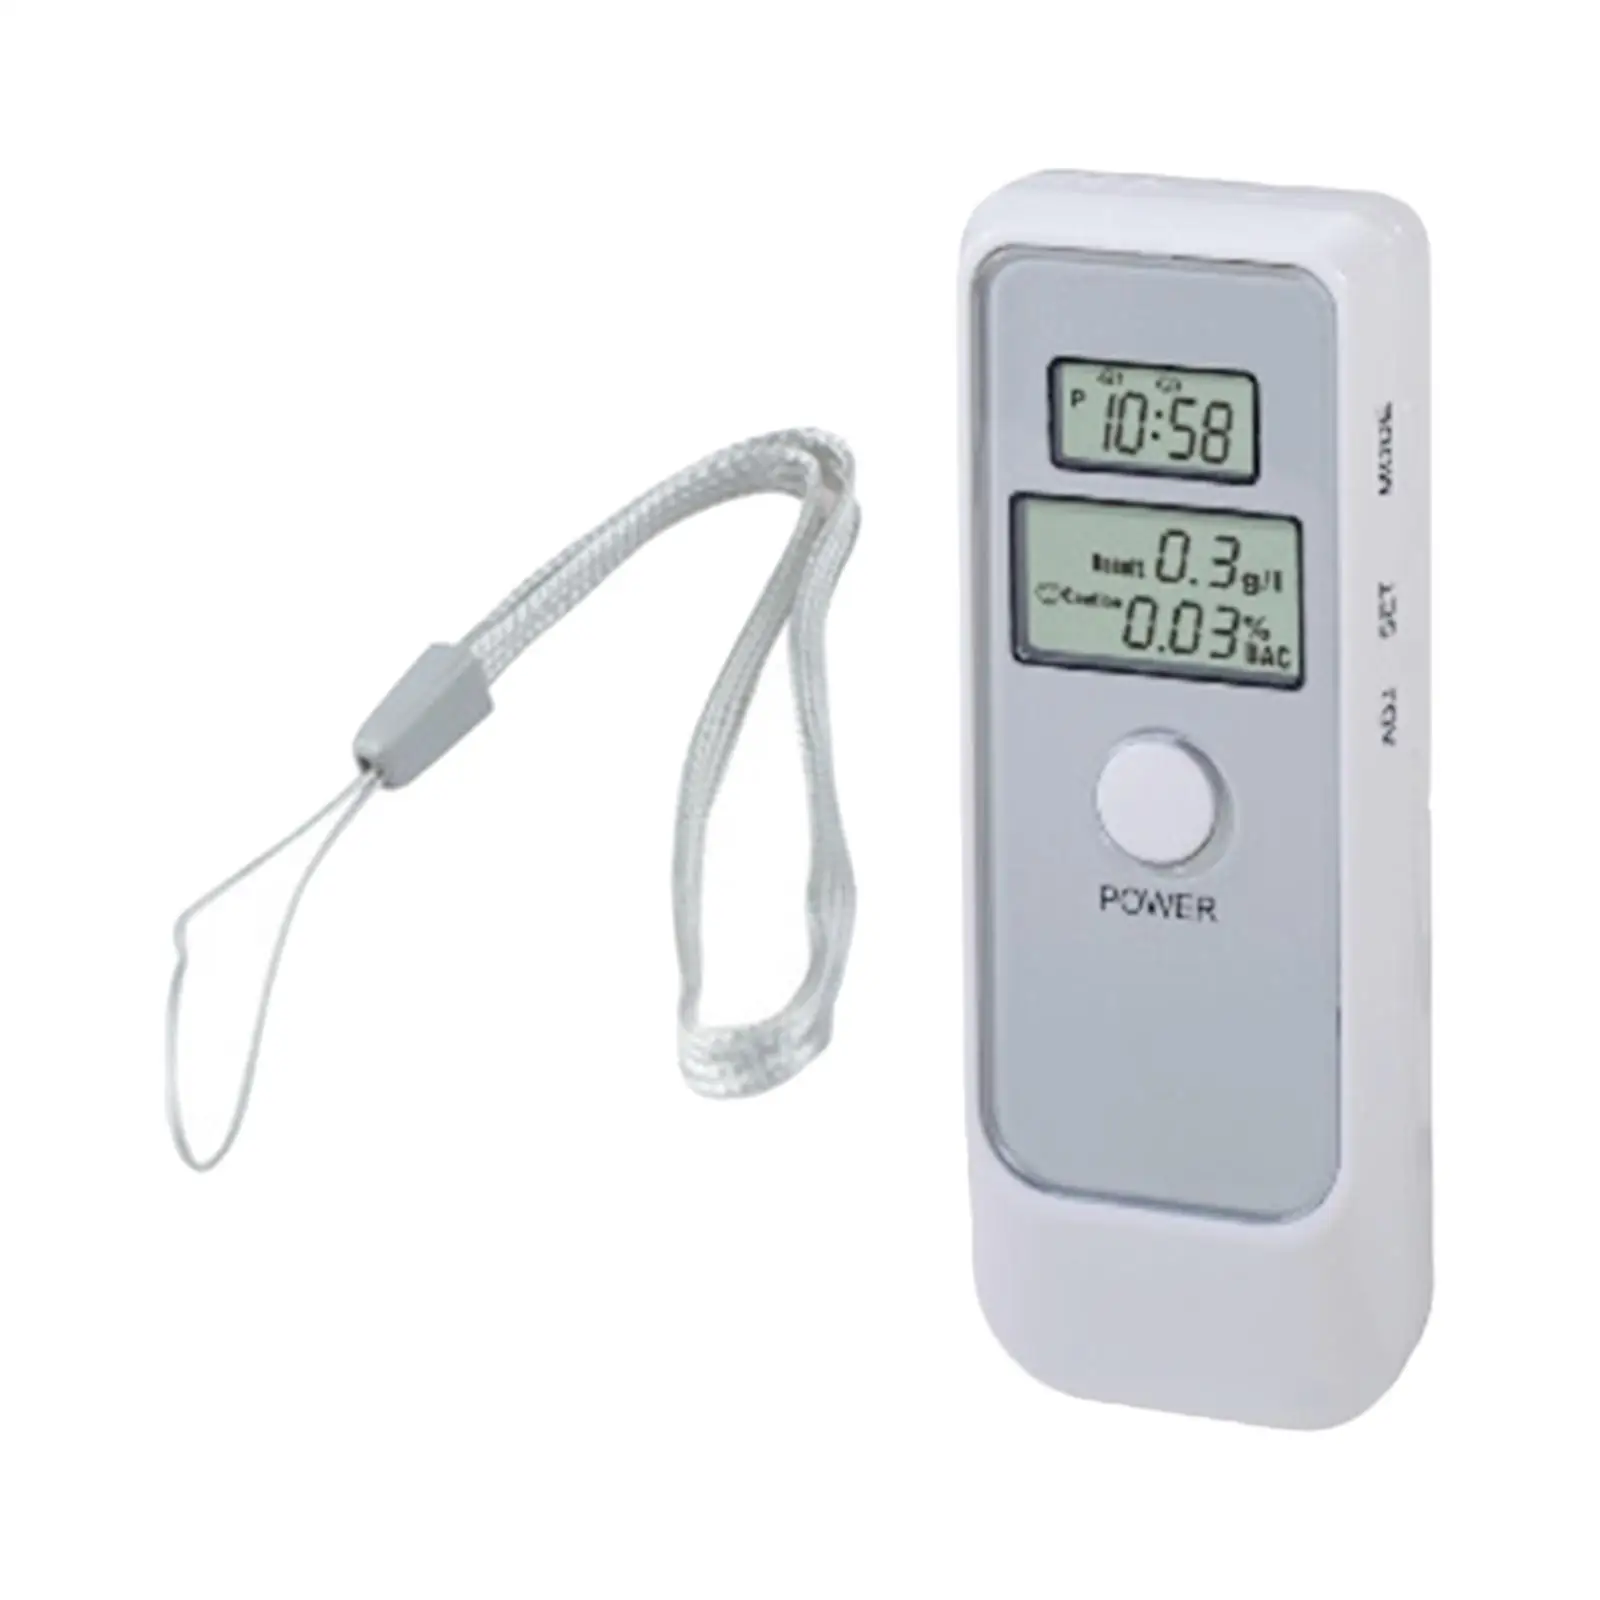 Digital Breath Alcohol Tester Energy Saving One Button Operate for Drivers